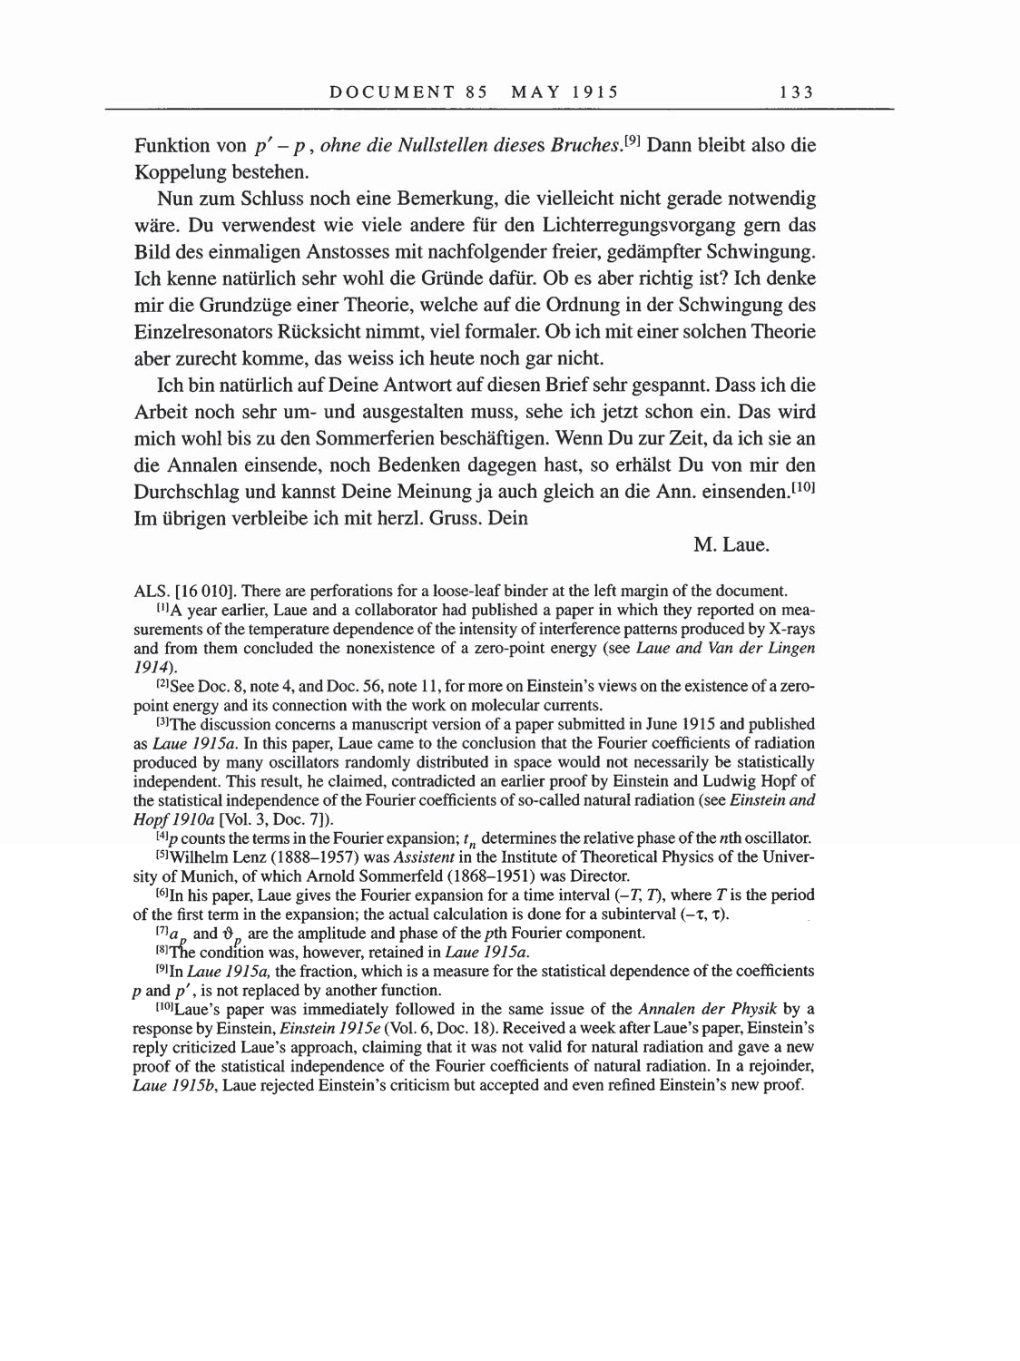 Volume 8, Part A: The Berlin Years: Correspondence 1914-1917 page 133